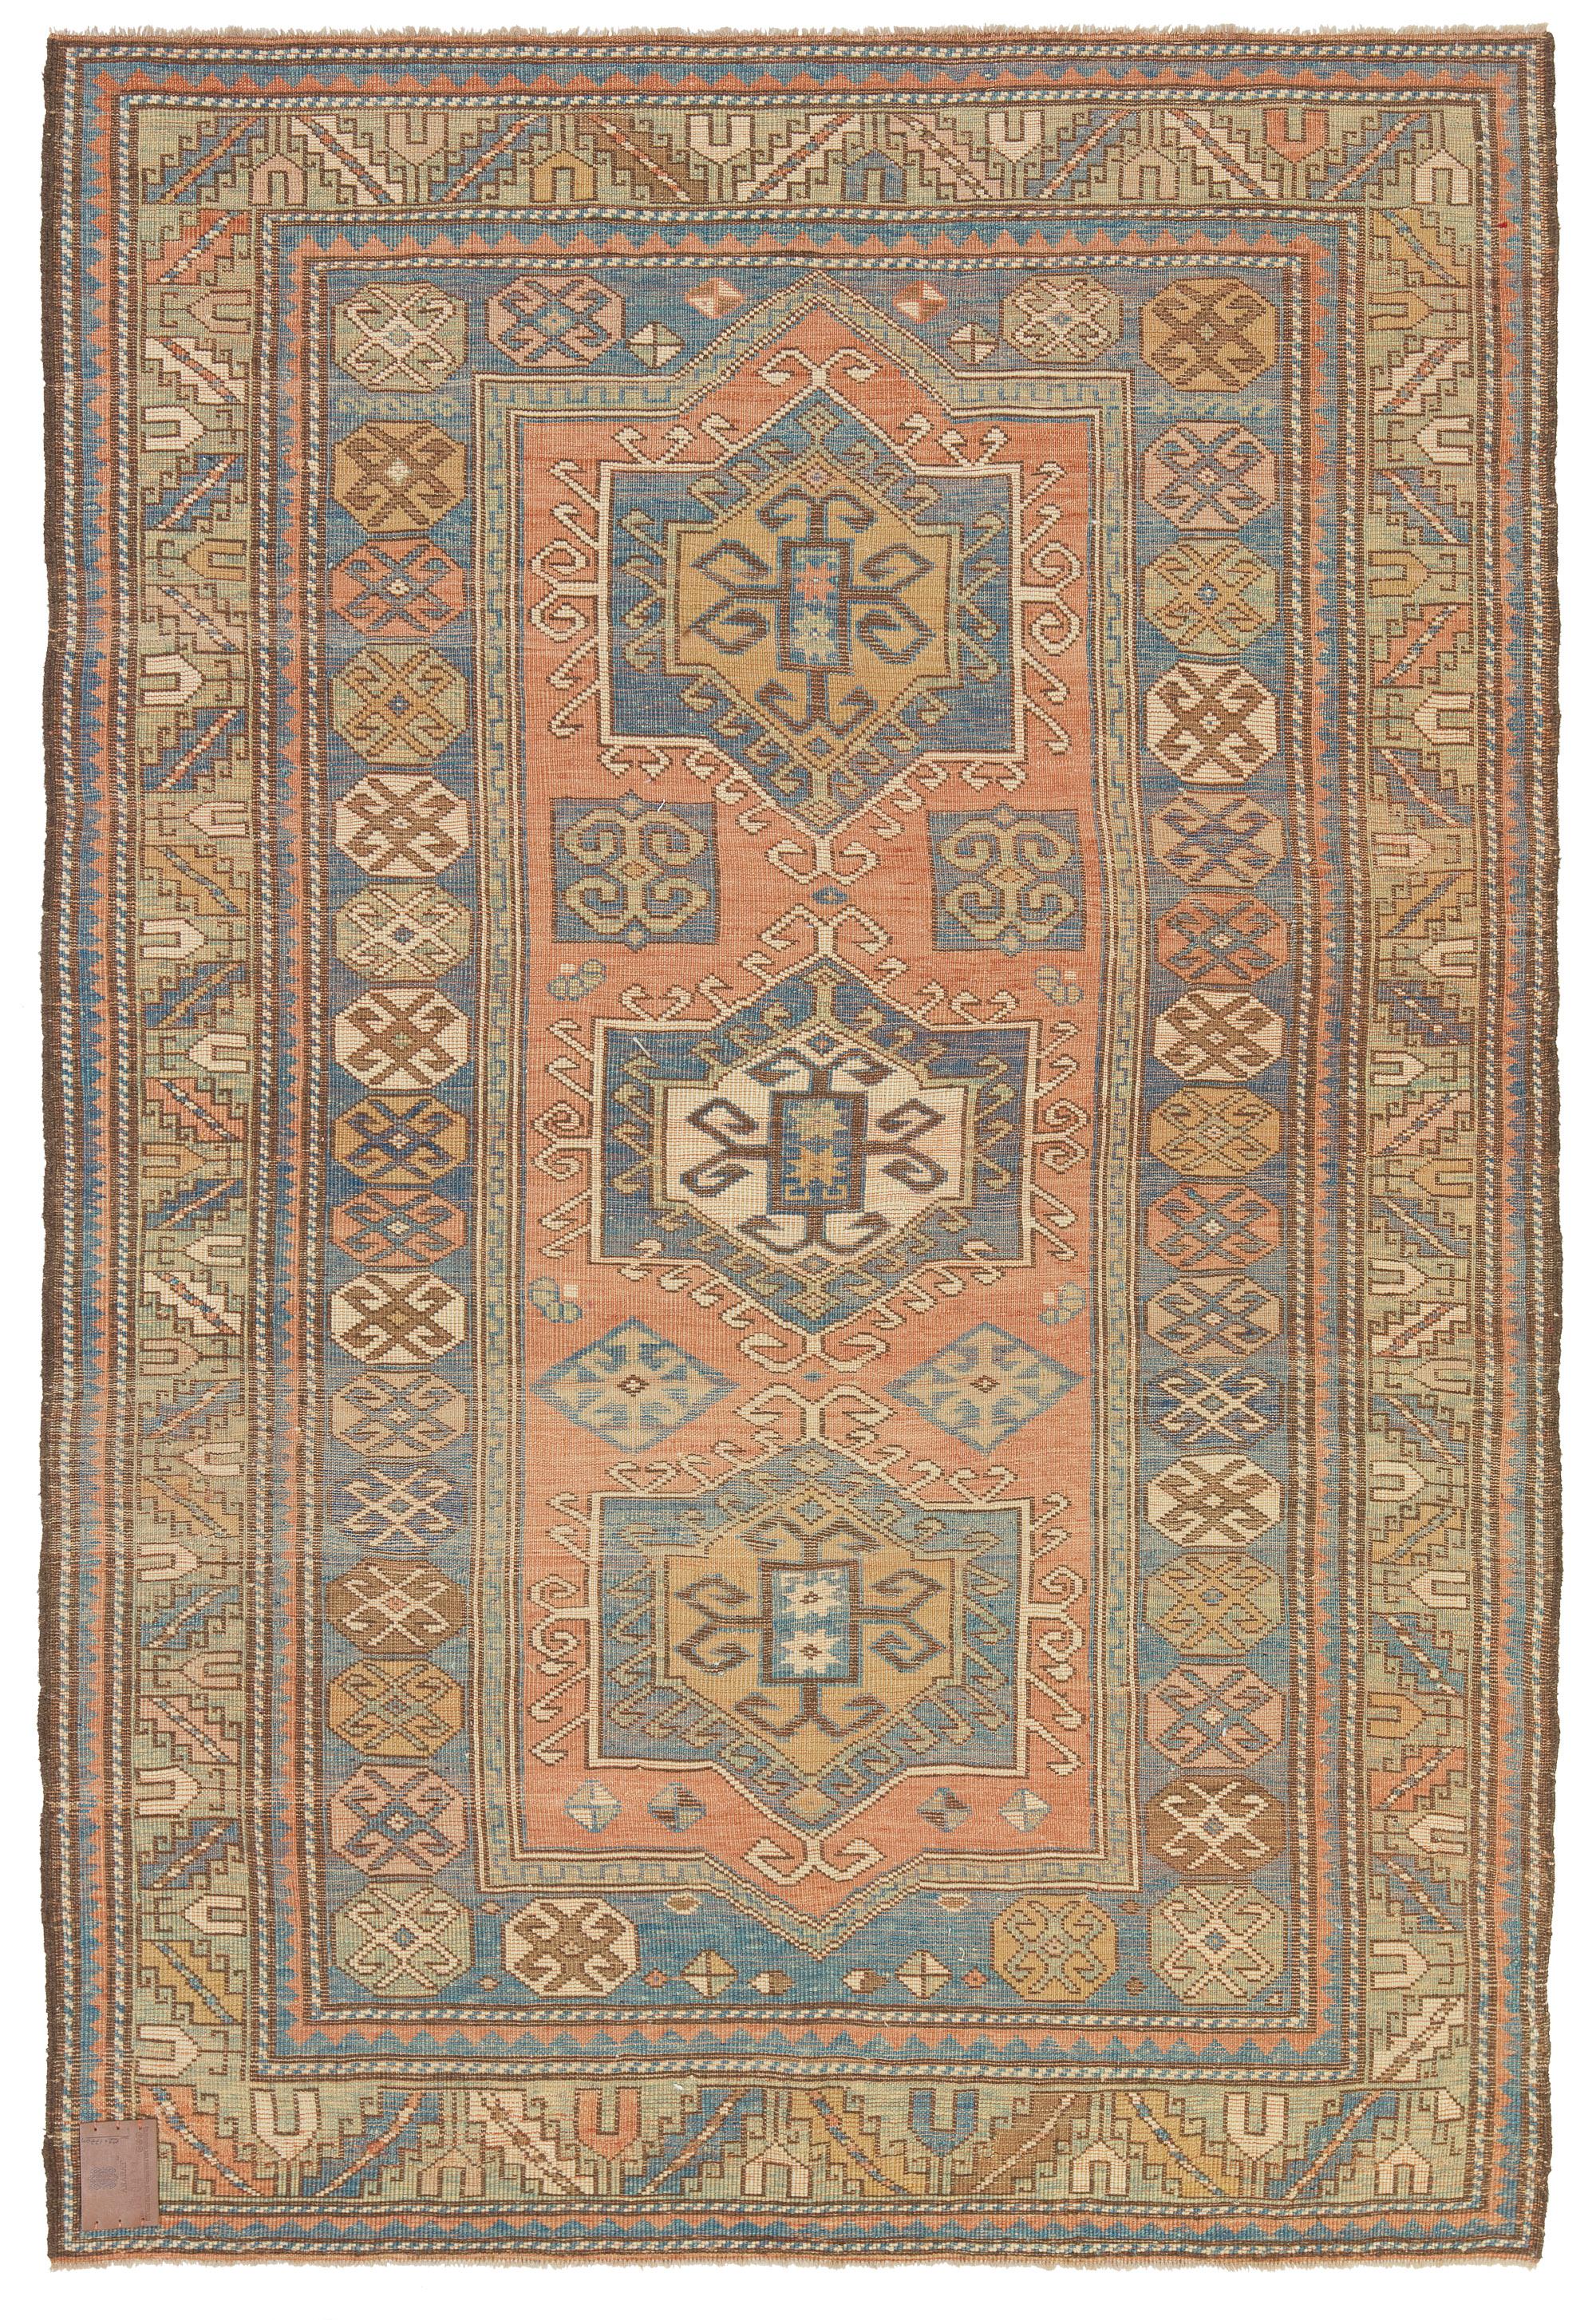 This is another Kazak example of the Fachralo, a town north of Lori-Pambak and just southwest of Bordjalou, from the late 19th-century, Caucasus area. It has given its name to a number of usually small, boldly designed, and brilliantly colored Kazak